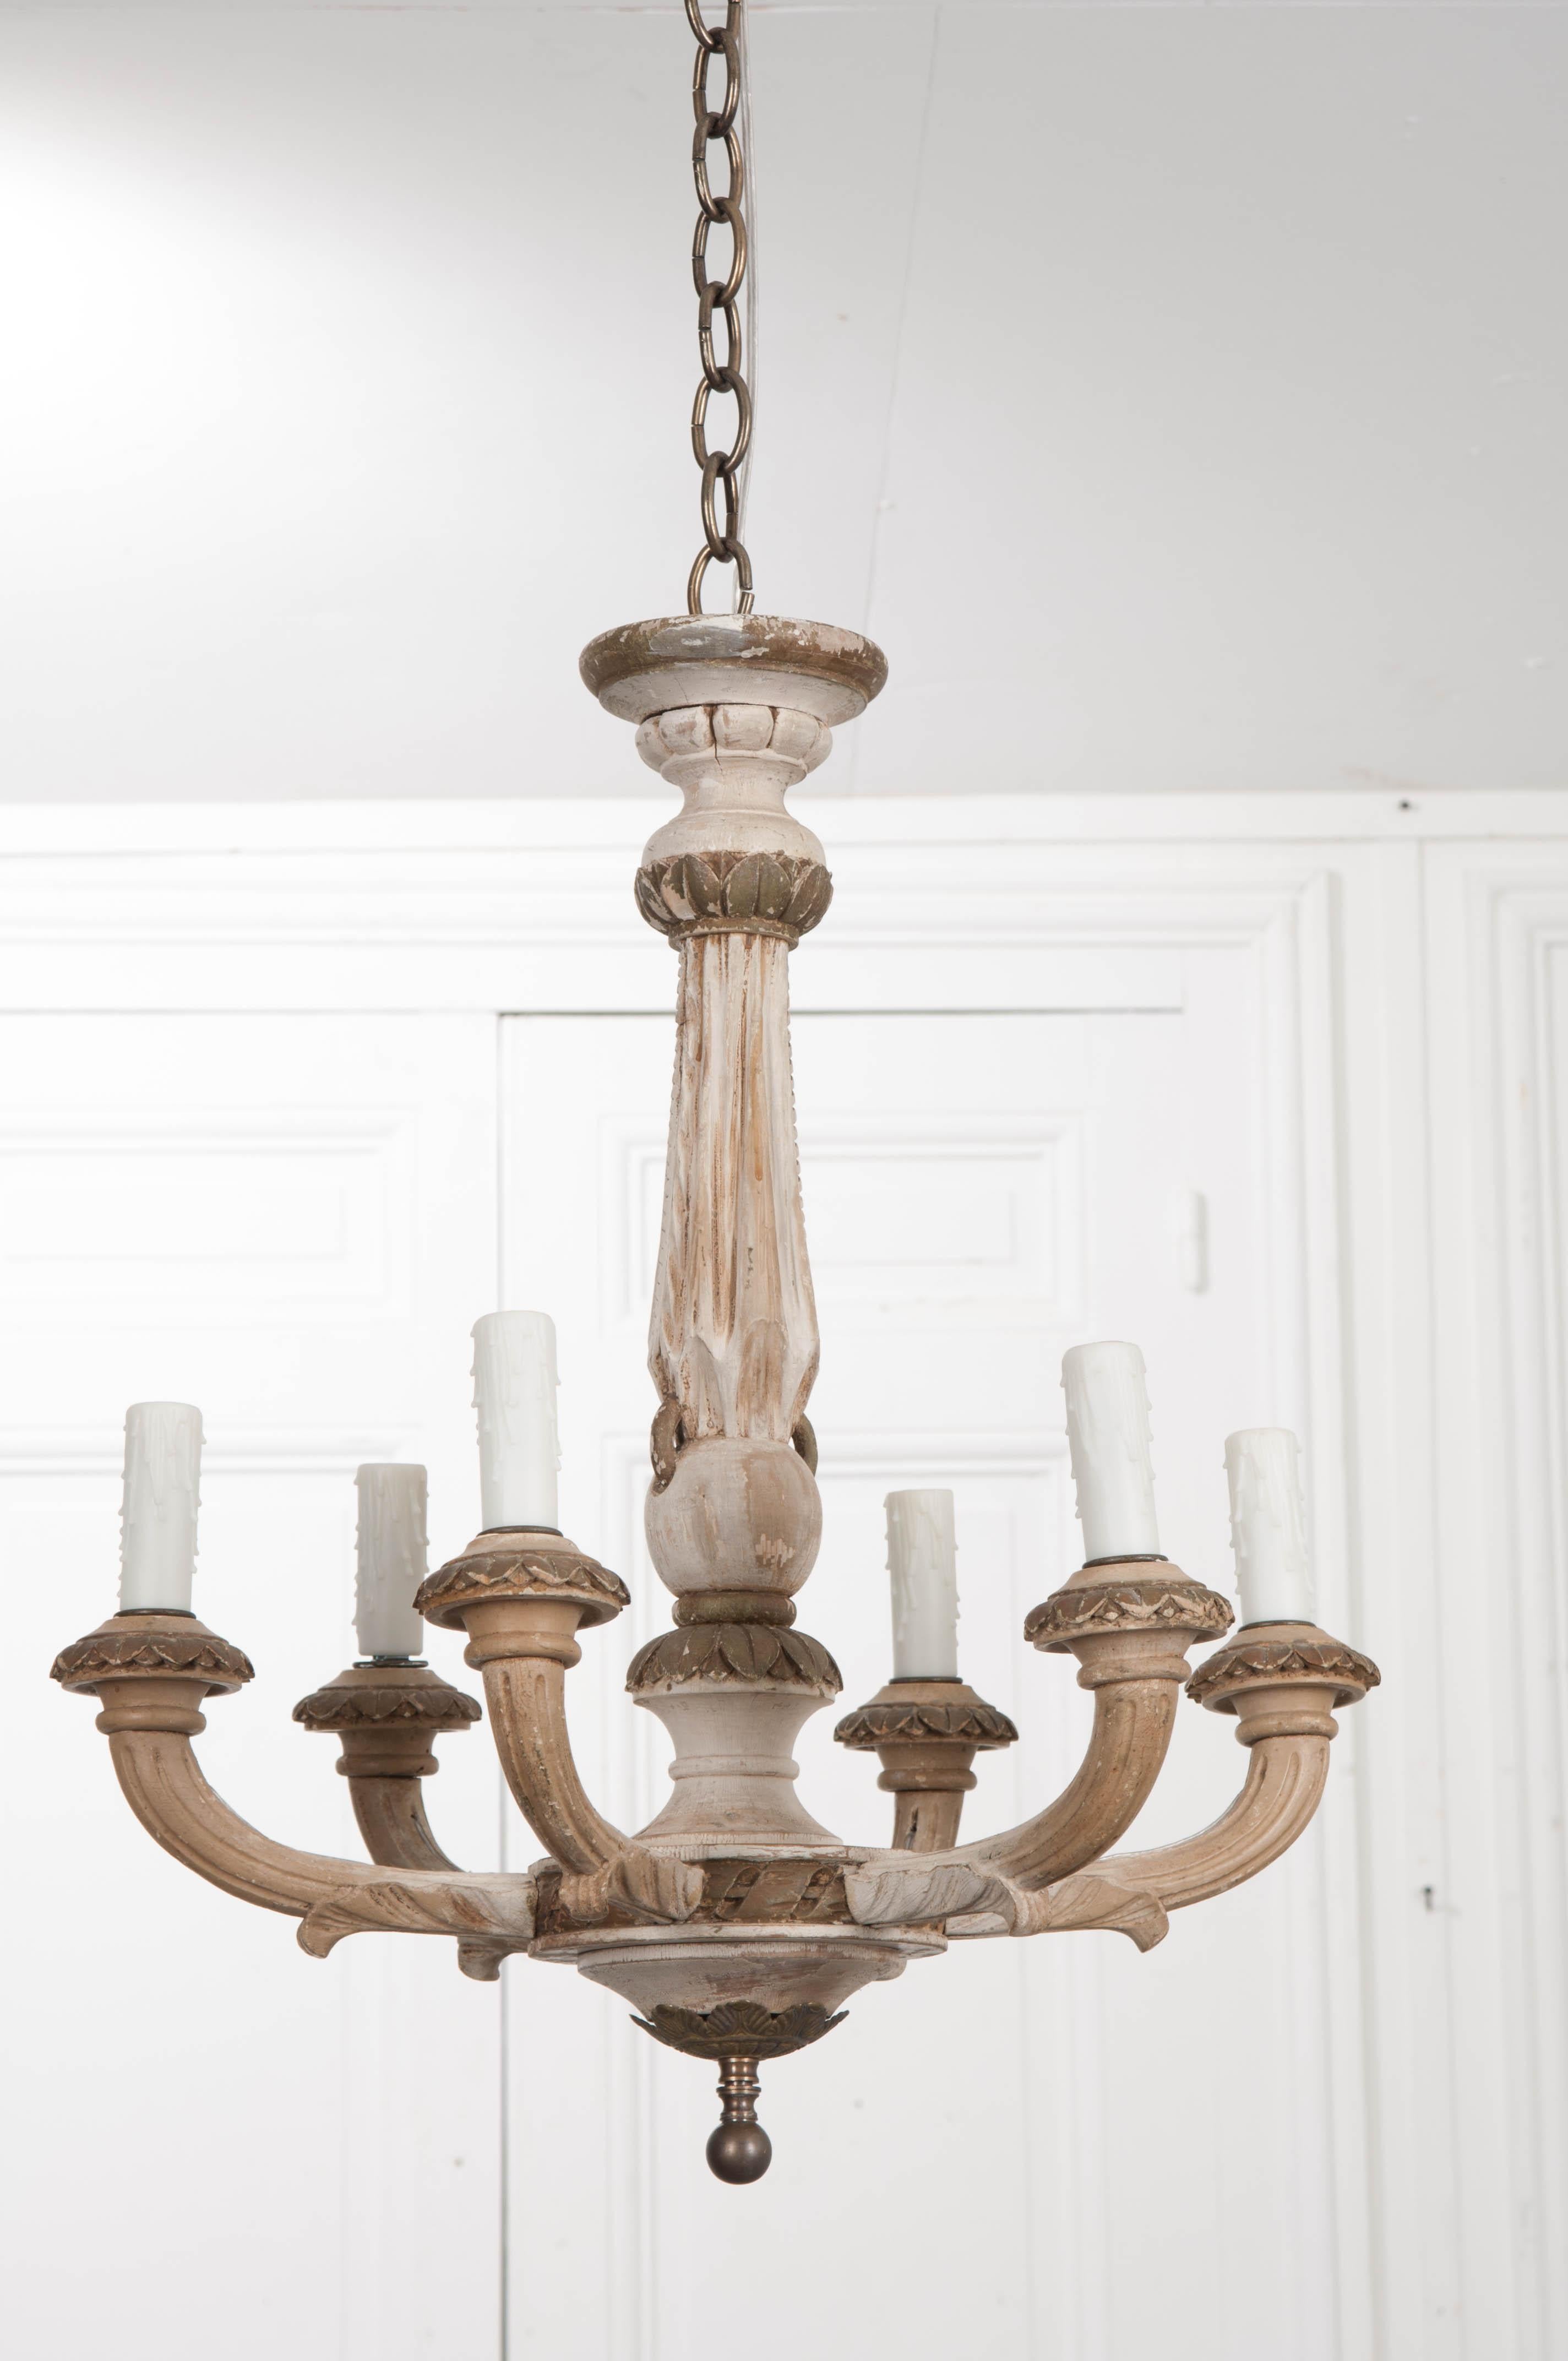 This attractive Louis XVI-style painted and parcel-gilt six-arm chandelier has a lovely patina and would finish a boudoir or powder room nicely. The fluted standard tapers upward and has upper and lower acanthus leaf-carved collars, with like-carved